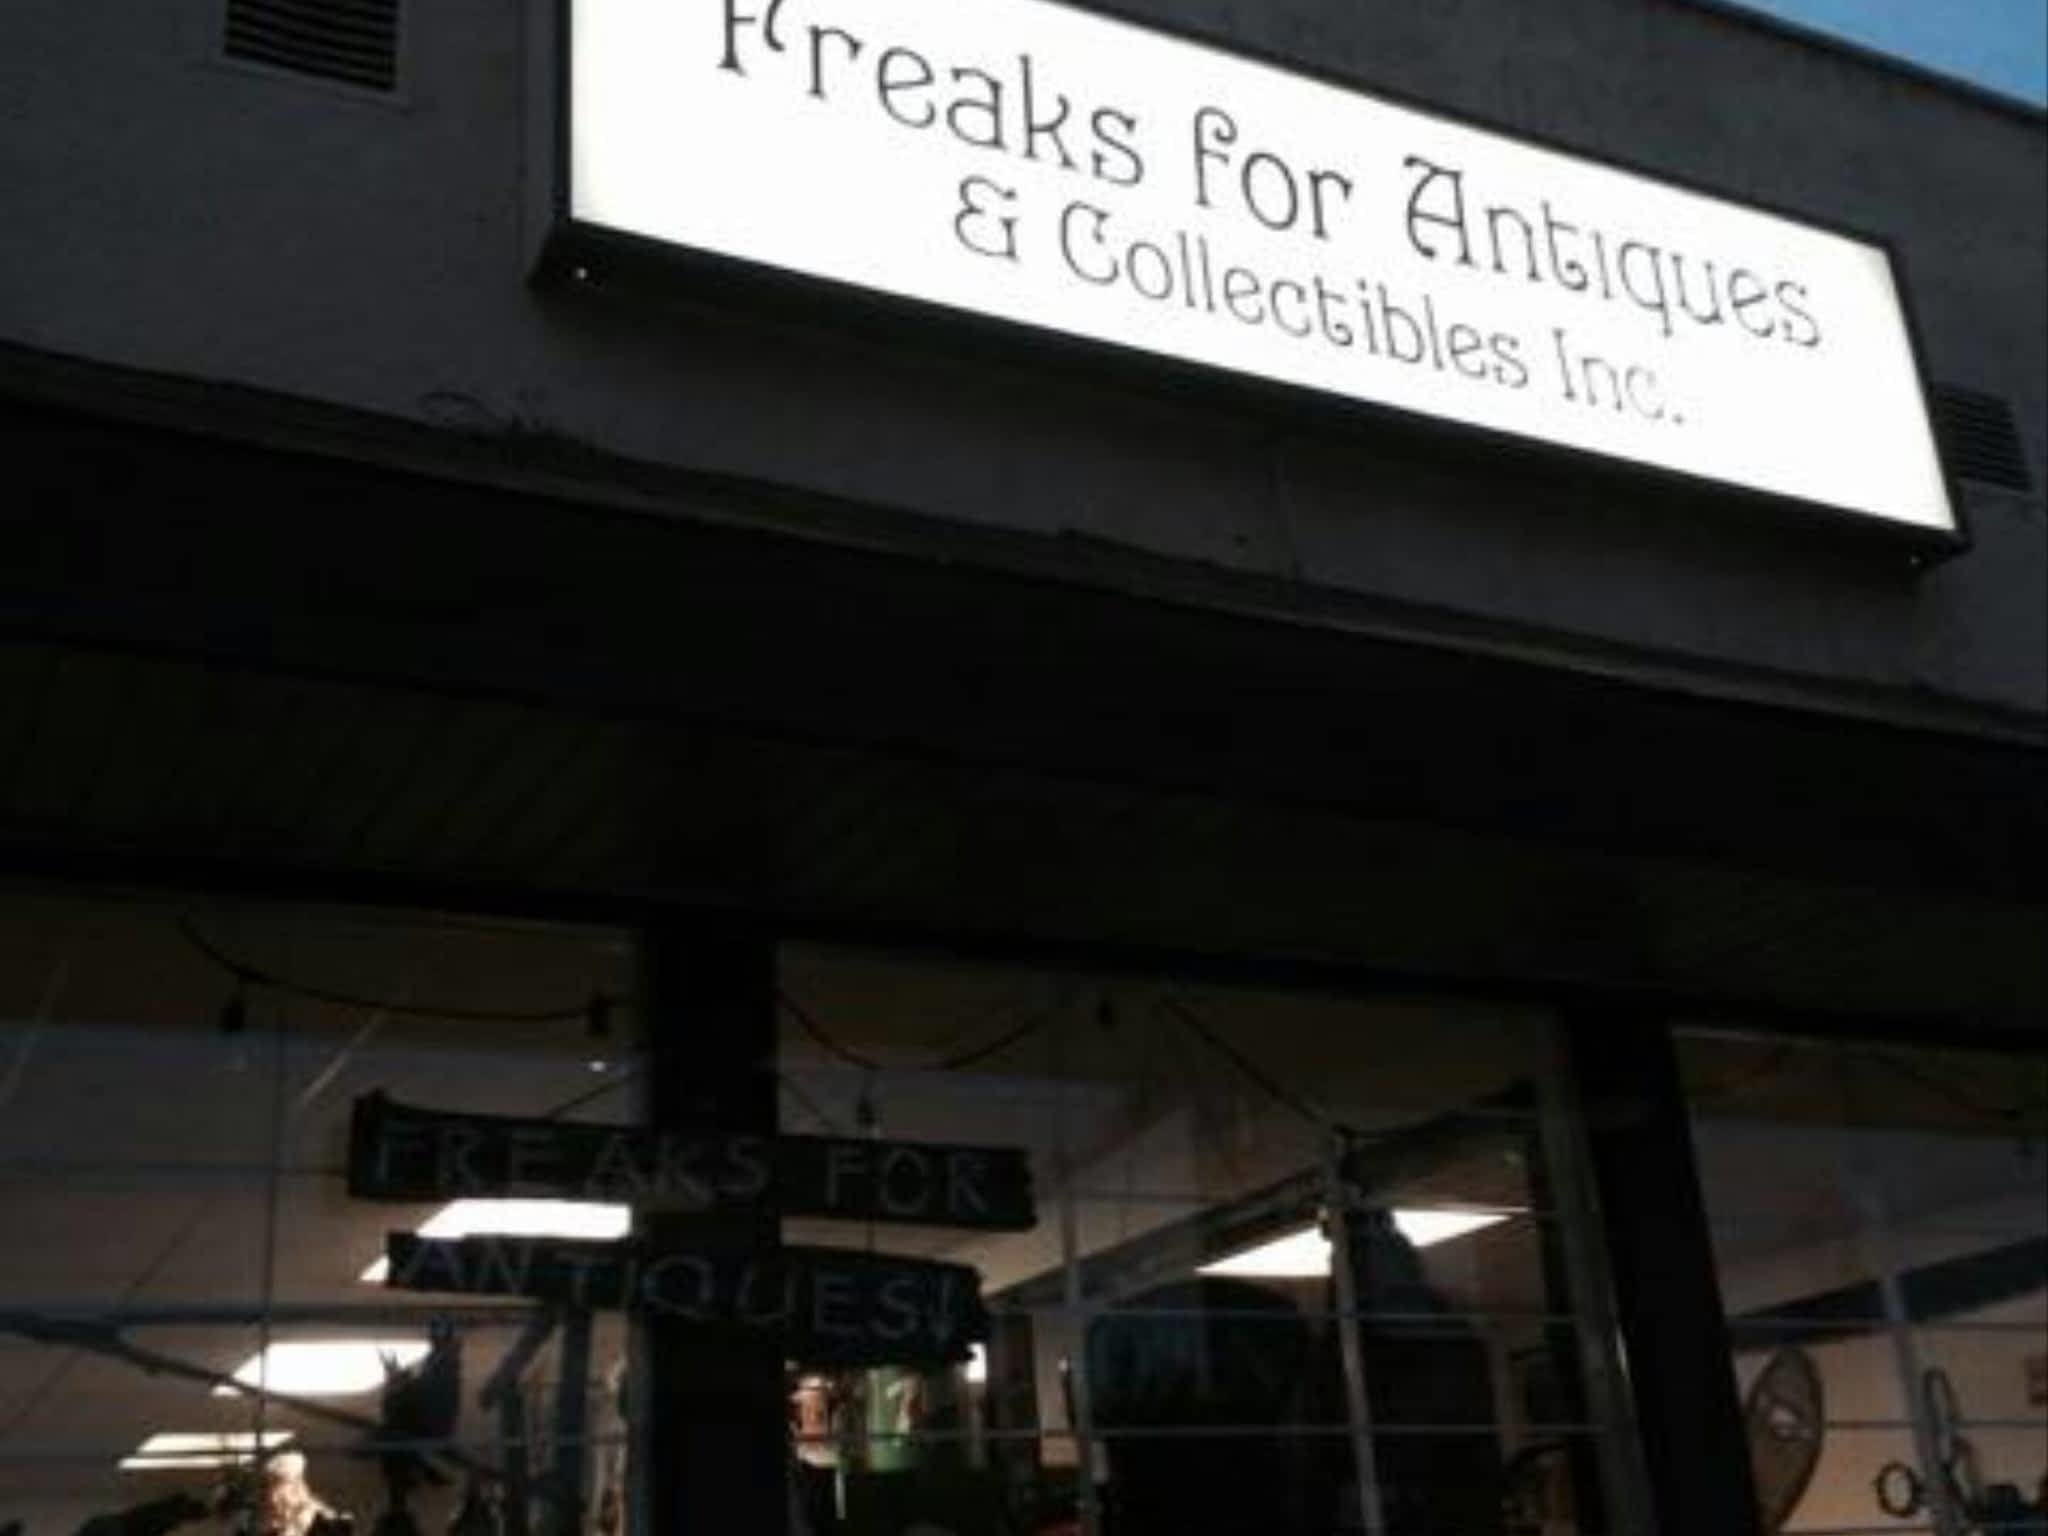 photo Freaks For Antiques & Collectibles Inc